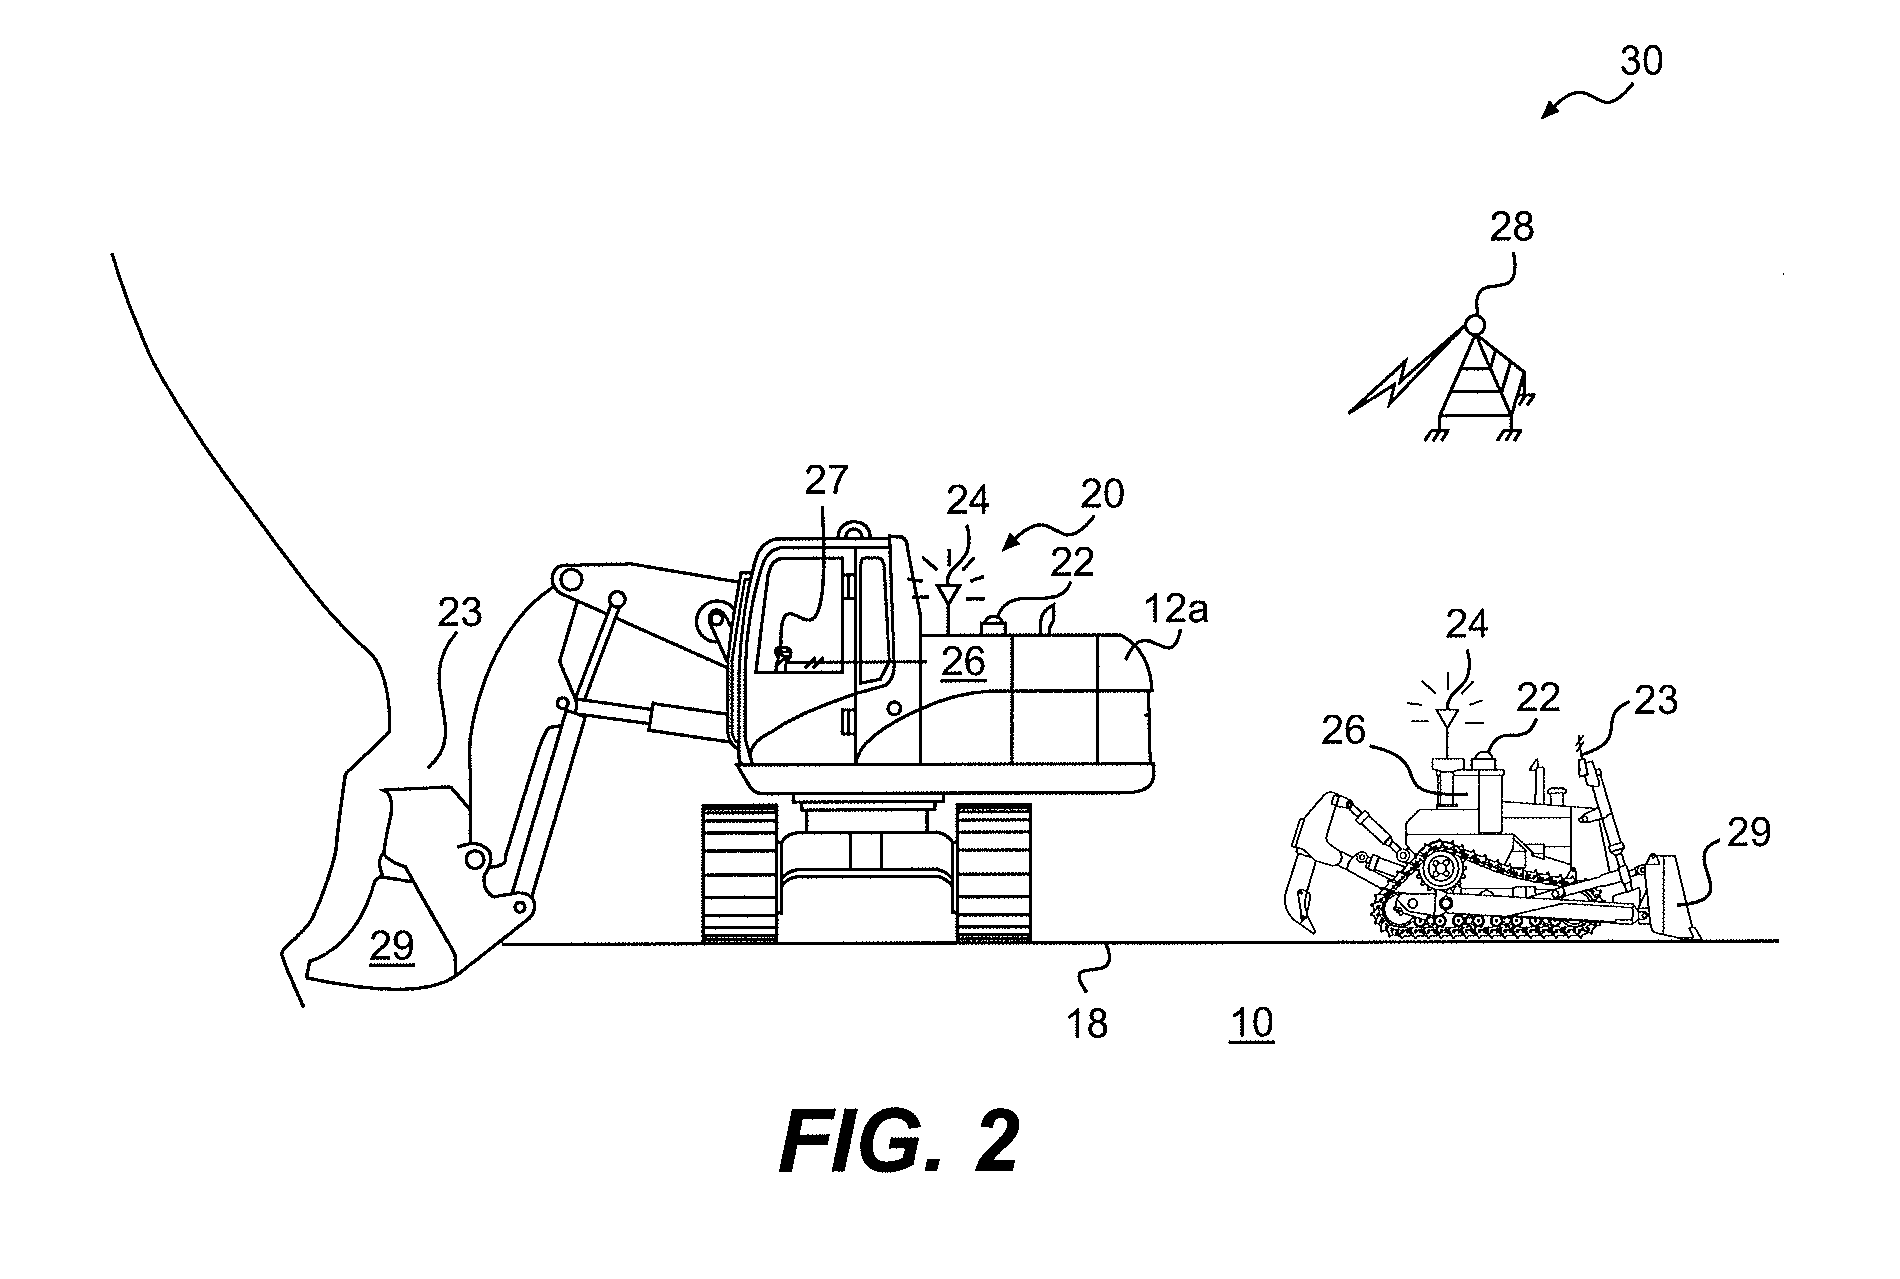 Control system having tool tracking